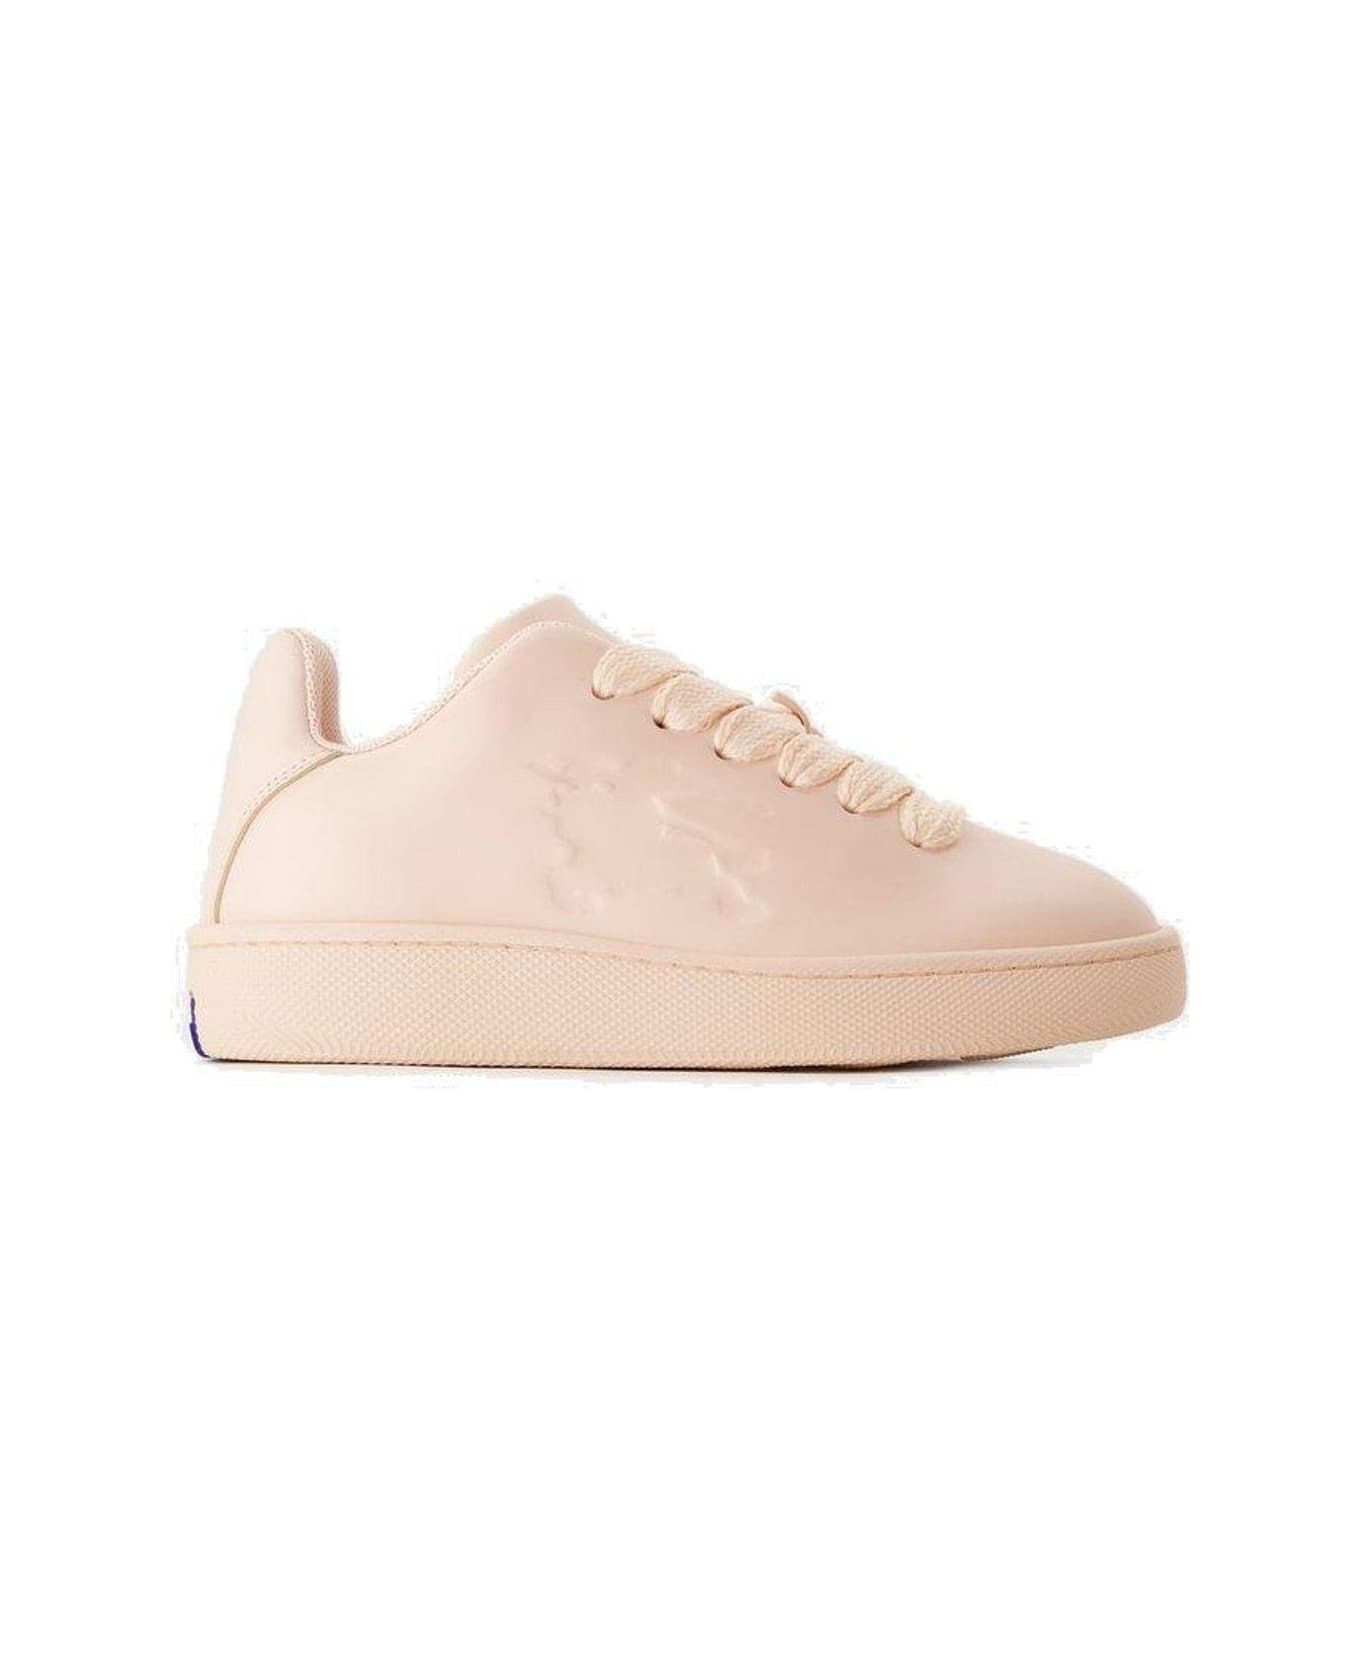 Burberry Box Equestrian Knight Embossed Sneakers - Rosa スニーカー